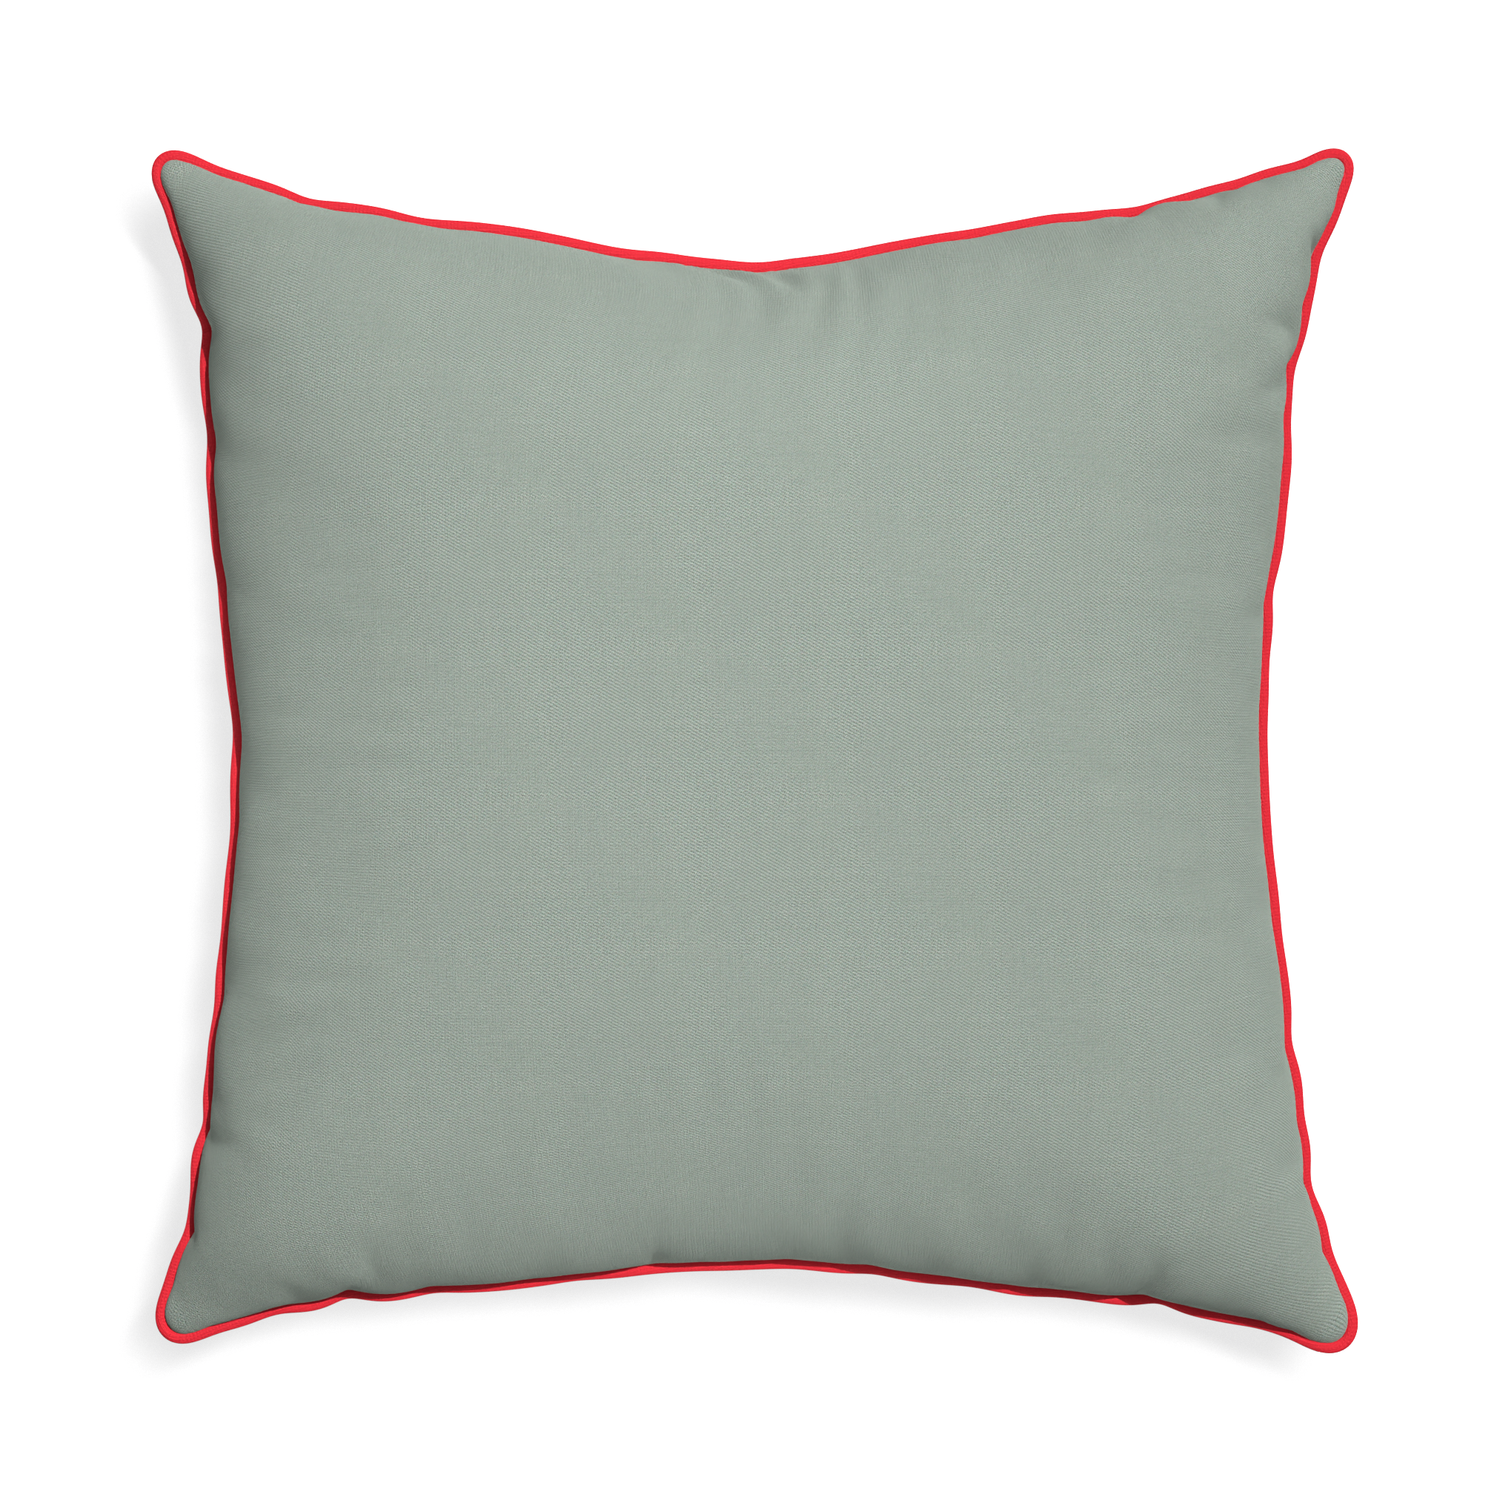 Euro-sham sage custom pillow with cherry piping on white background